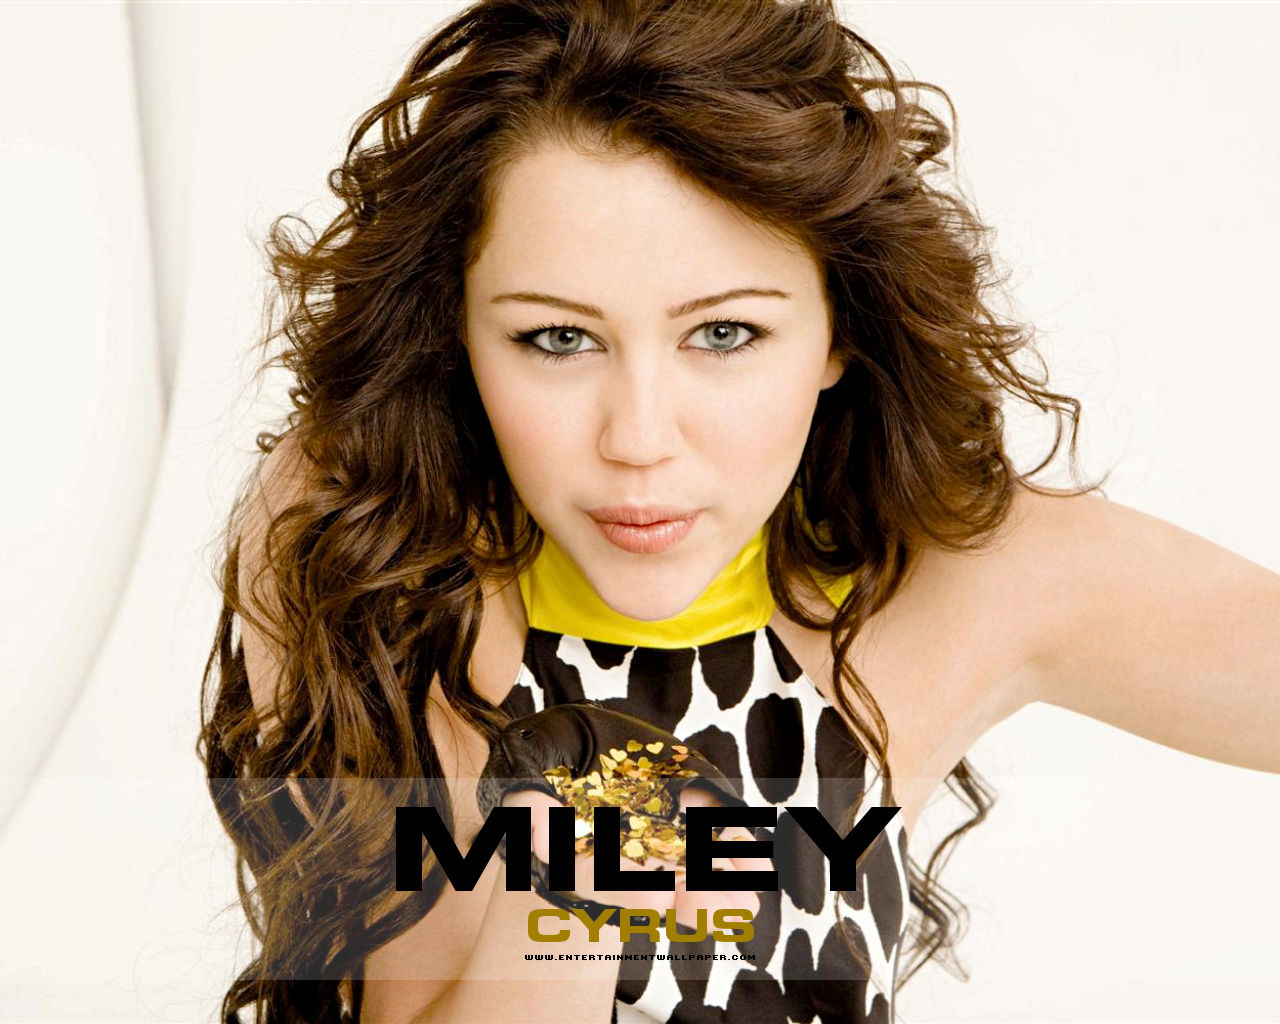 Miley Cyrus,singer,pictures